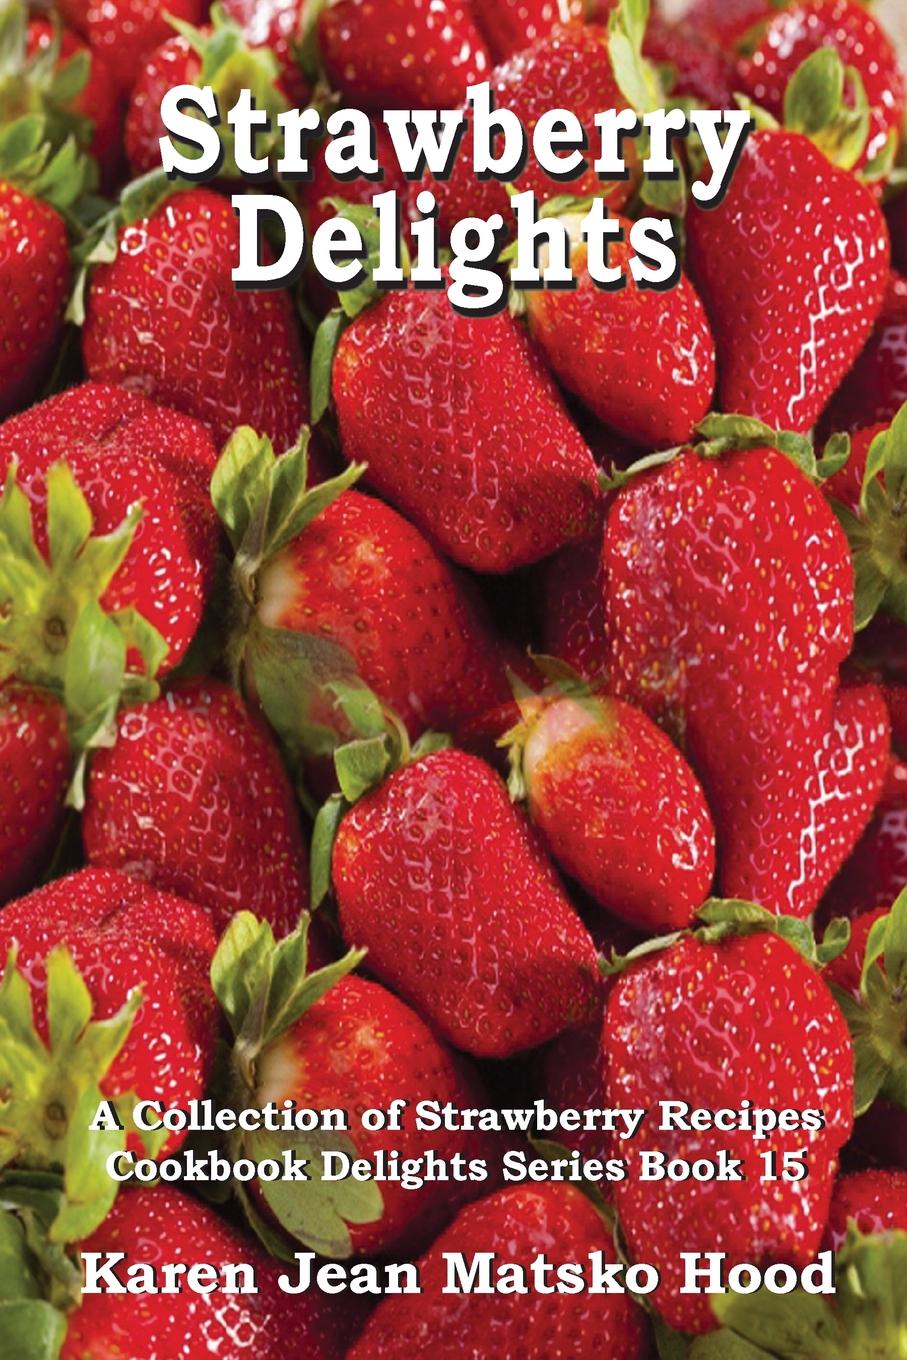 Strawberry Delights Cookbook. A Collection of Strawberry Recipes